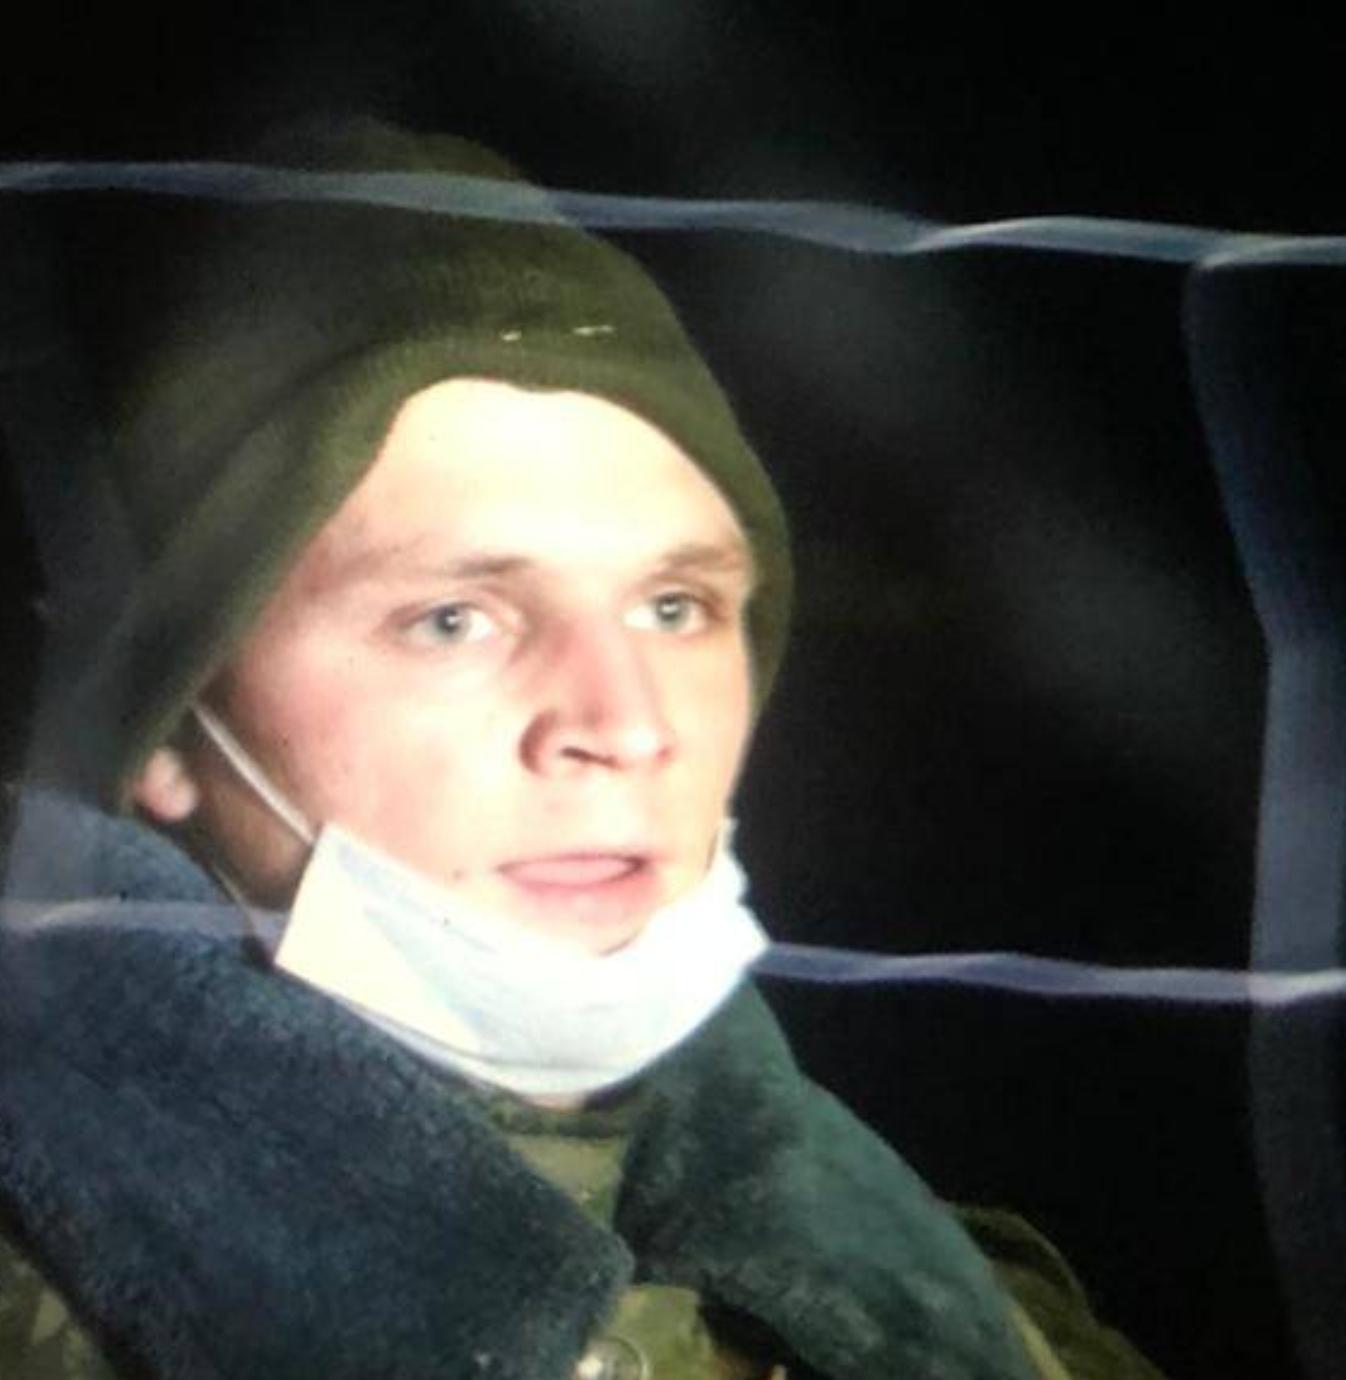 This man shot in the air and tried to damage the Polish border of the fence / photo twitter.com/StZaryn